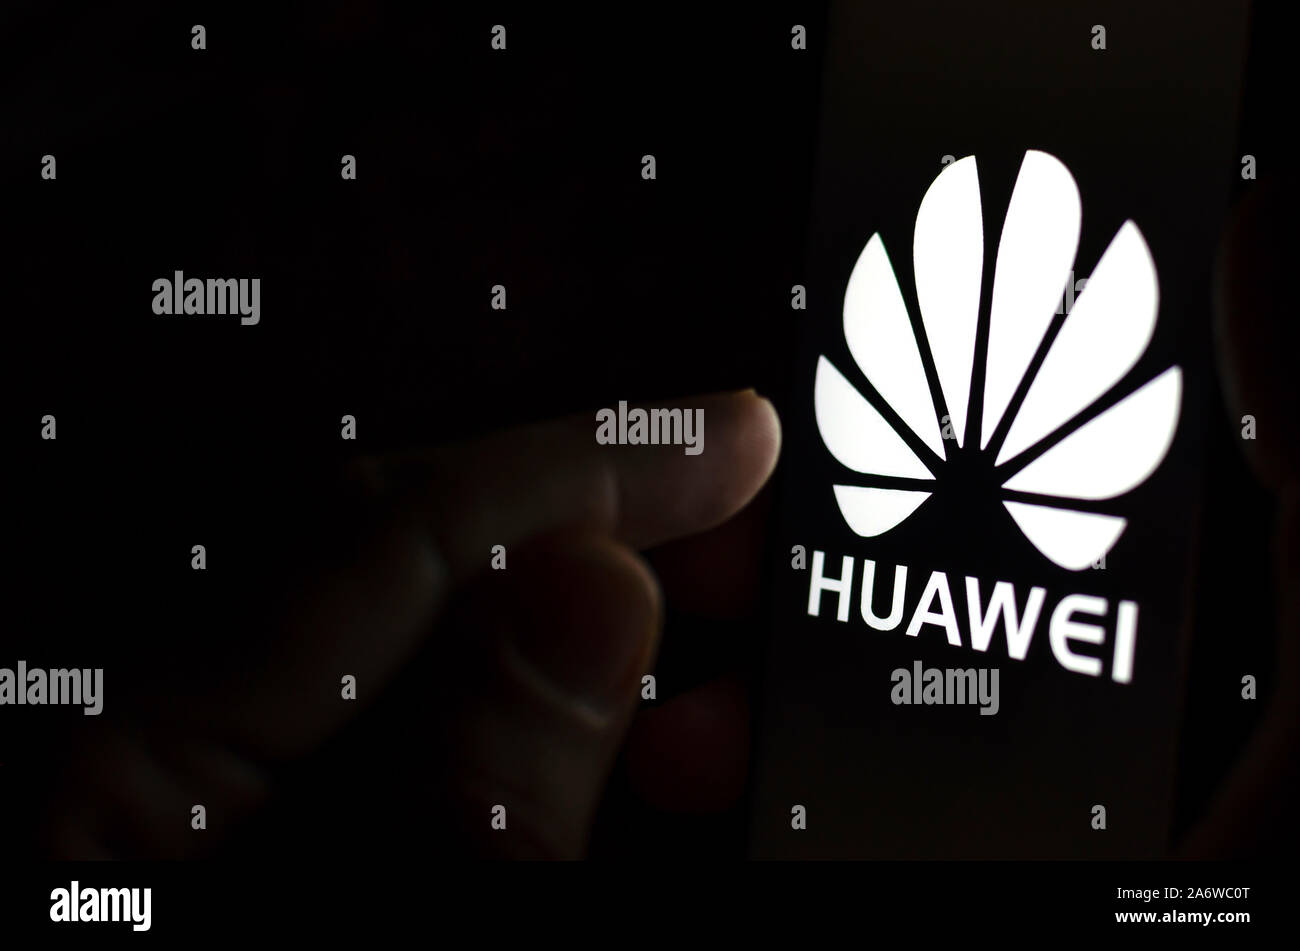 Huawei Logo on a smartphone screen in a dark room and a finger touching it. Stock Photo